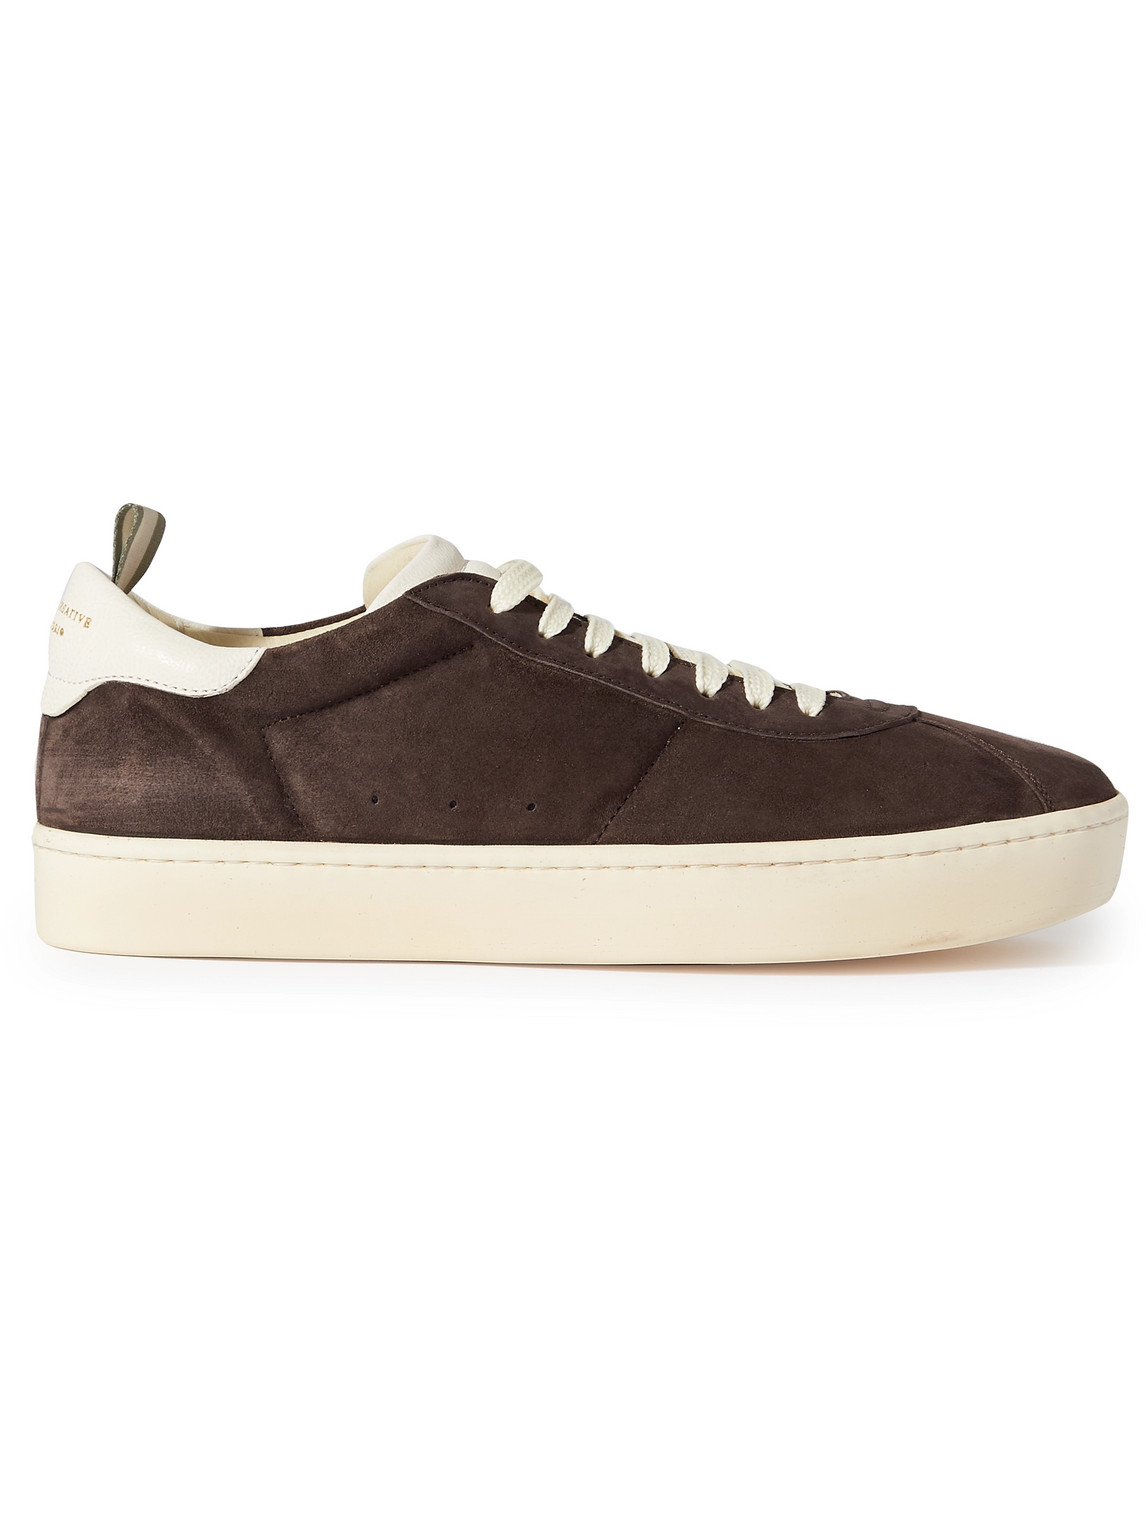 Officine Creative Kameleon Leather-Trimmed Suede Sneakers